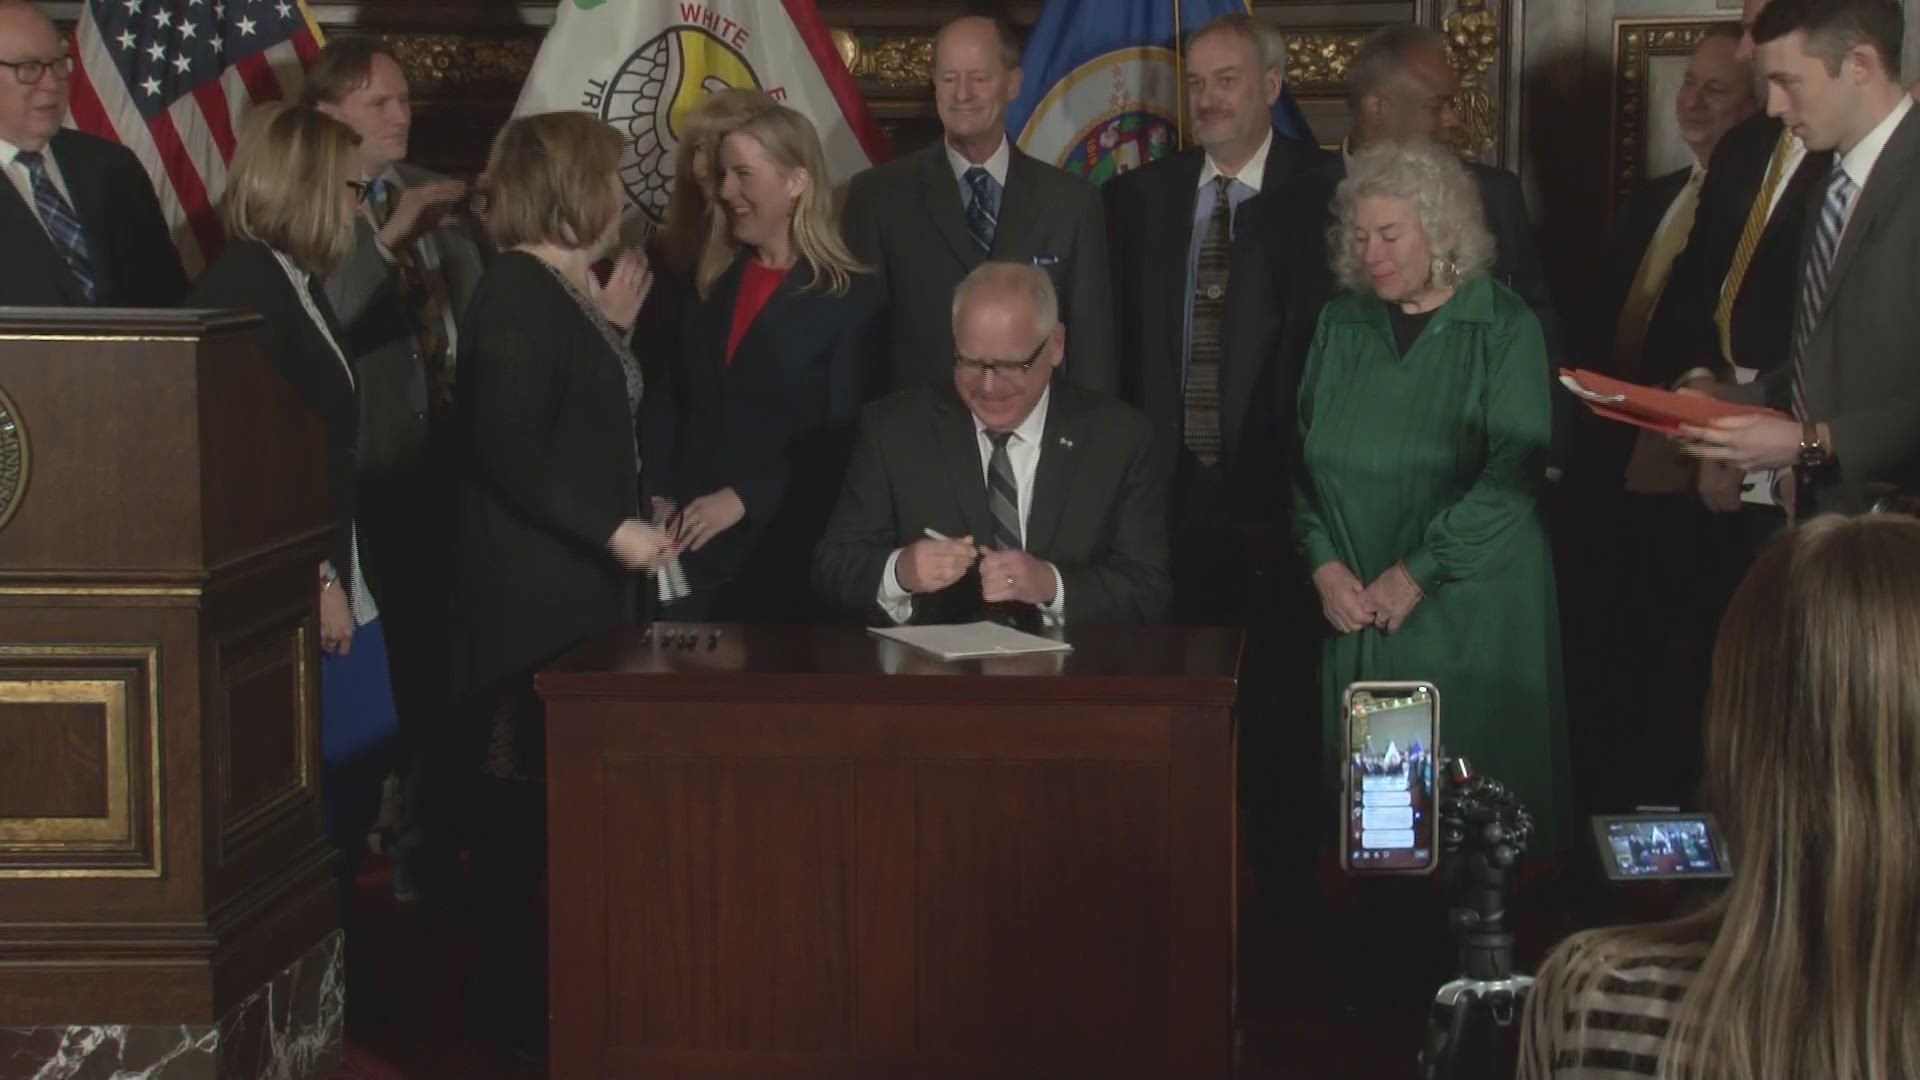 Gov. Tim Walz signed the first two bills of his administration Tuesday, saluting lawmakers from both parties for showing compromise in getting things done.